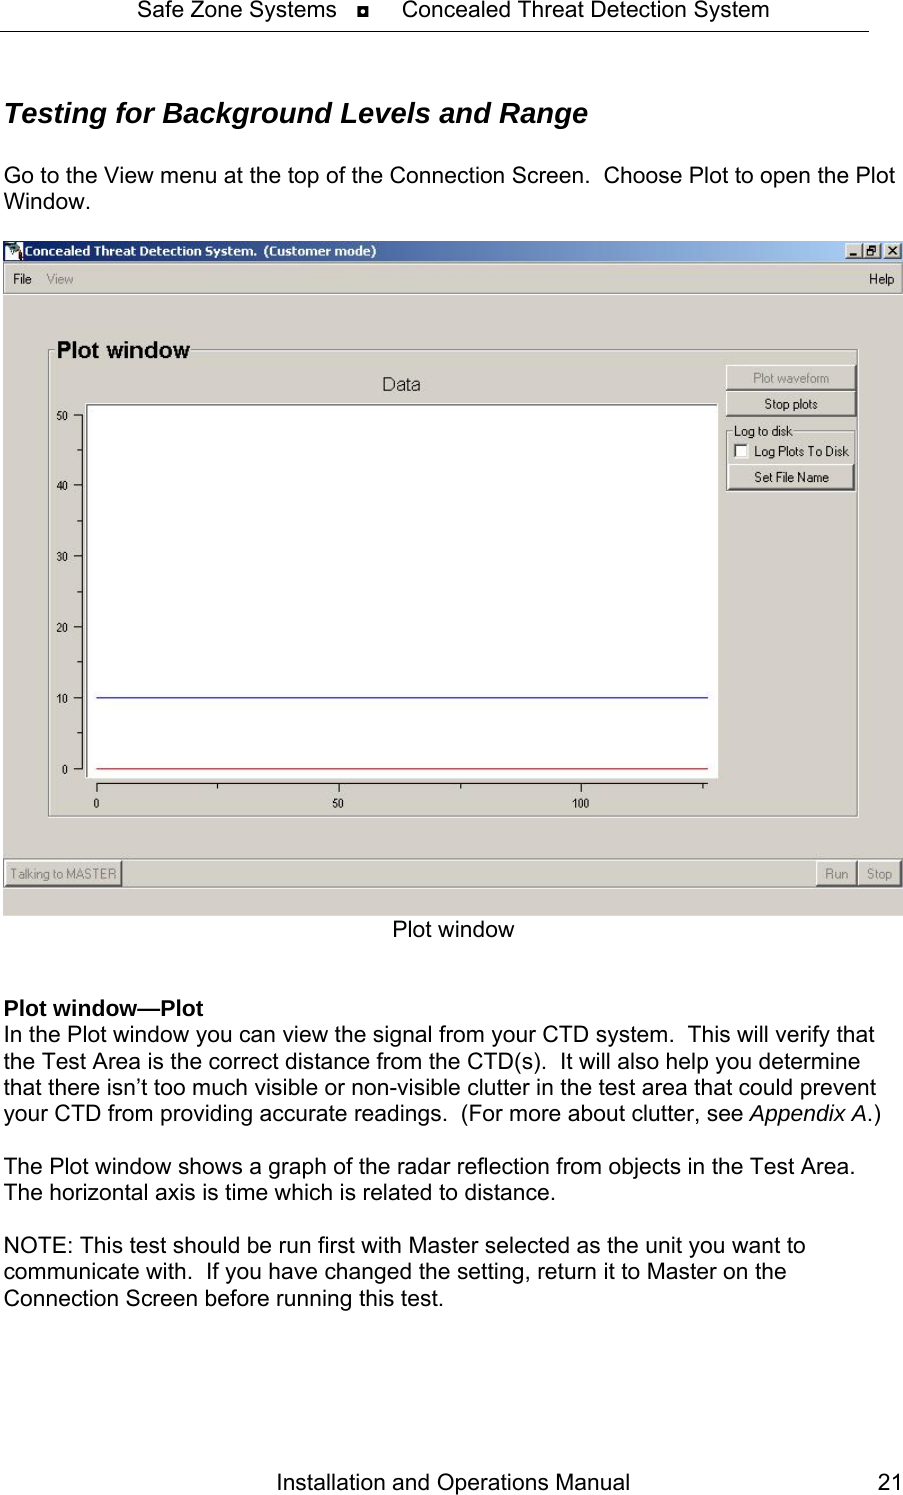 Safe Zone Systems   ◘     Concealed Threat Detection System  Testing for Background Levels and Range  Go to the View menu at the top of the Connection Screen.  Choose Plot to open the Plot Window.    Plot window    Plot window—Plot In the Plot window you can view the signal from your CTD system.  This will verify that the Test Area is the correct distance from the CTD(s).  It will also help you determine that there isn’t too much visible or non-visible clutter in the test area that could prevent your CTD from providing accurate readings.  (For more about clutter, see Appendix A.)  The Plot window shows a graph of the radar reflection from objects in the Test Area.  The horizontal axis is time which is related to distance.  NOTE: This test should be run first with Master selected as the unit you want to communicate with.  If you have changed the setting, return it to Master on the Connection Screen before running this test. Installation and Operations Manual  21